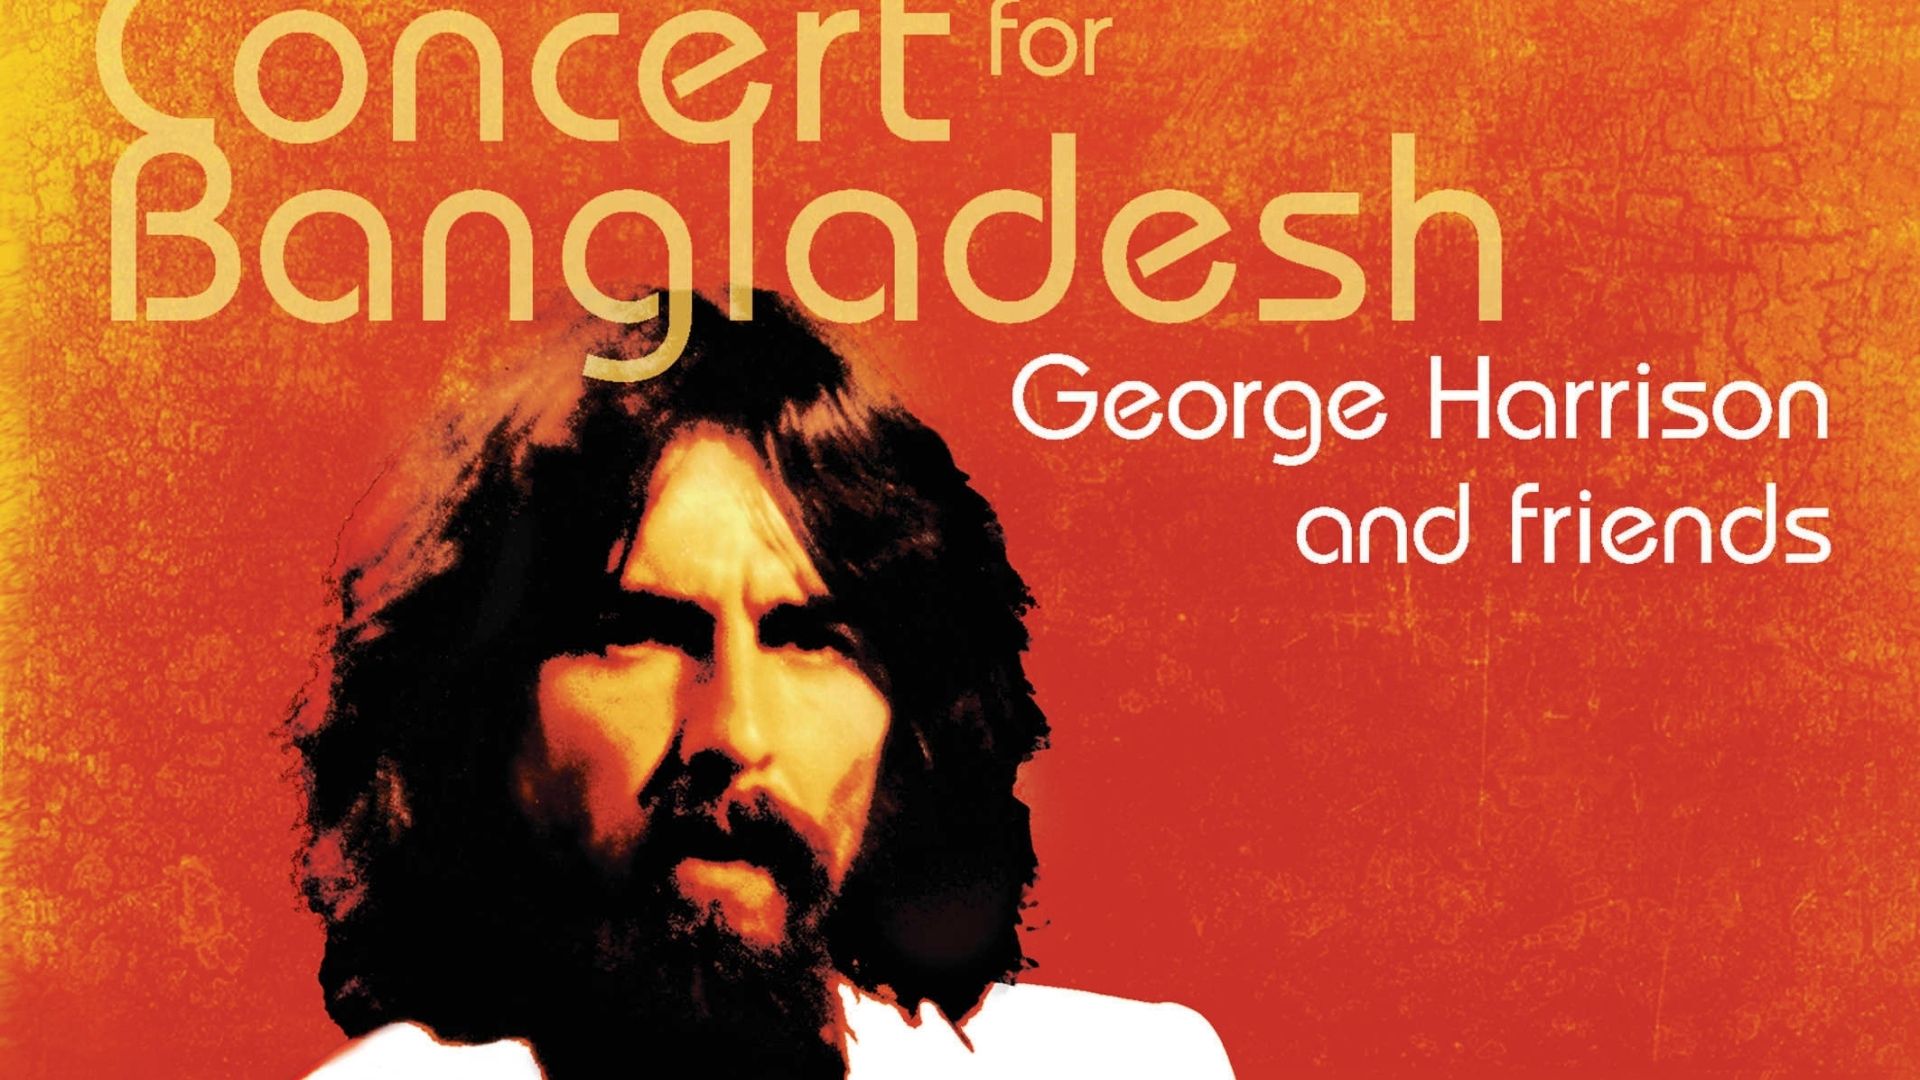 50 years of 'Concert for Bangladesh'